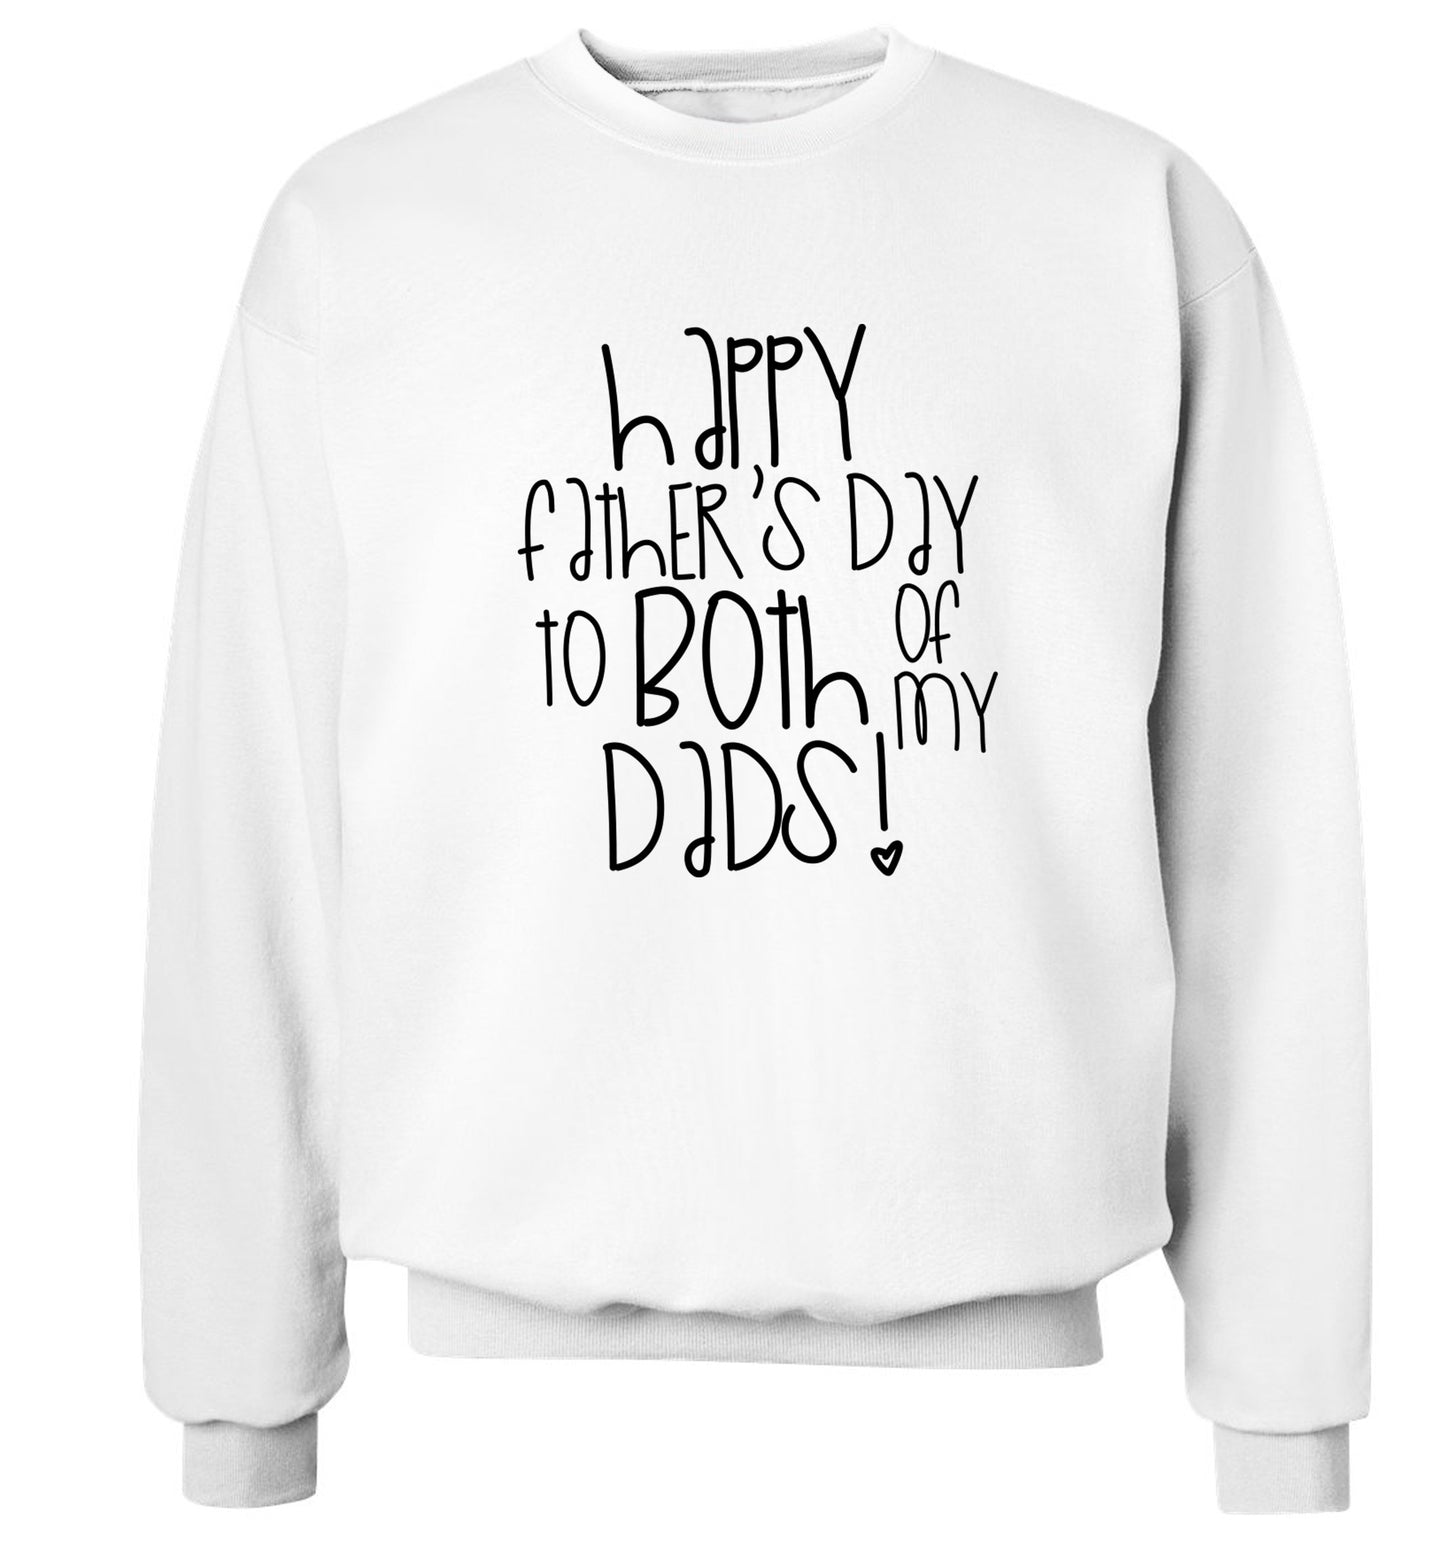 Happy father's day to both of my dads Adult's unisex white Sweater 2XL